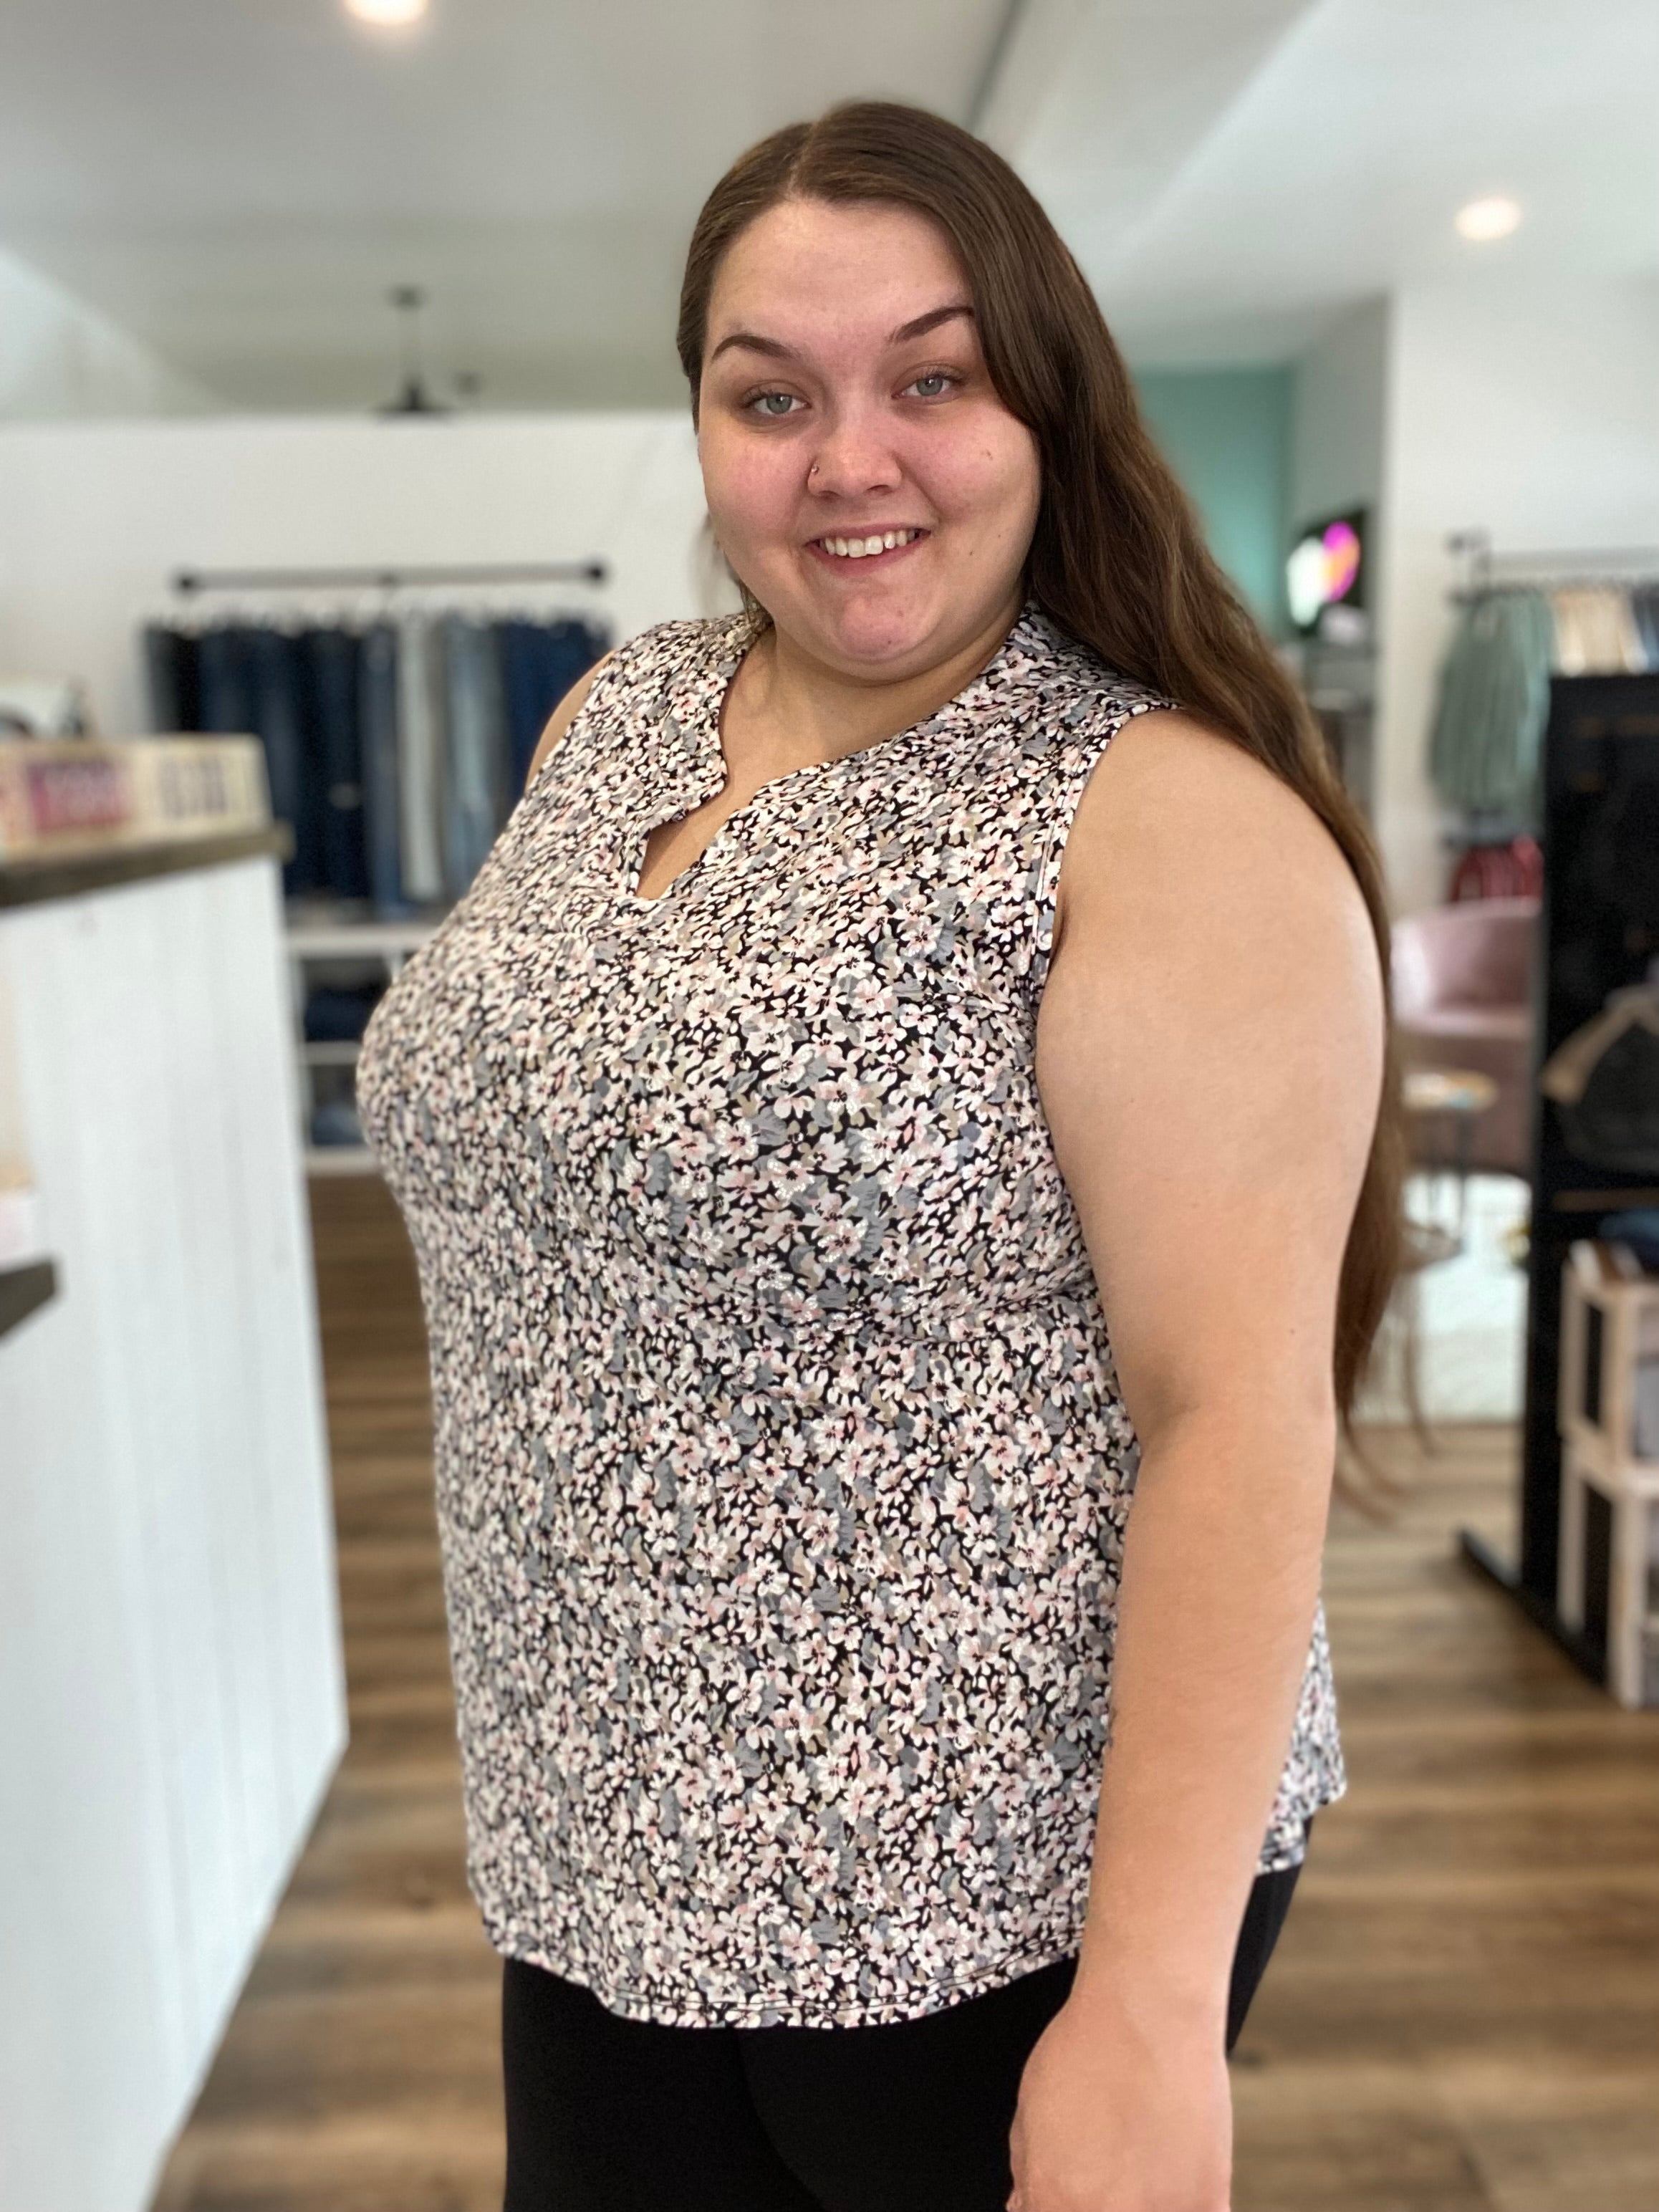 Shop Ansley Textured Floral Tank-Shirts & Tops at Ruby Joy Boutique, a Women's Clothing Store in Pickerington, Ohio